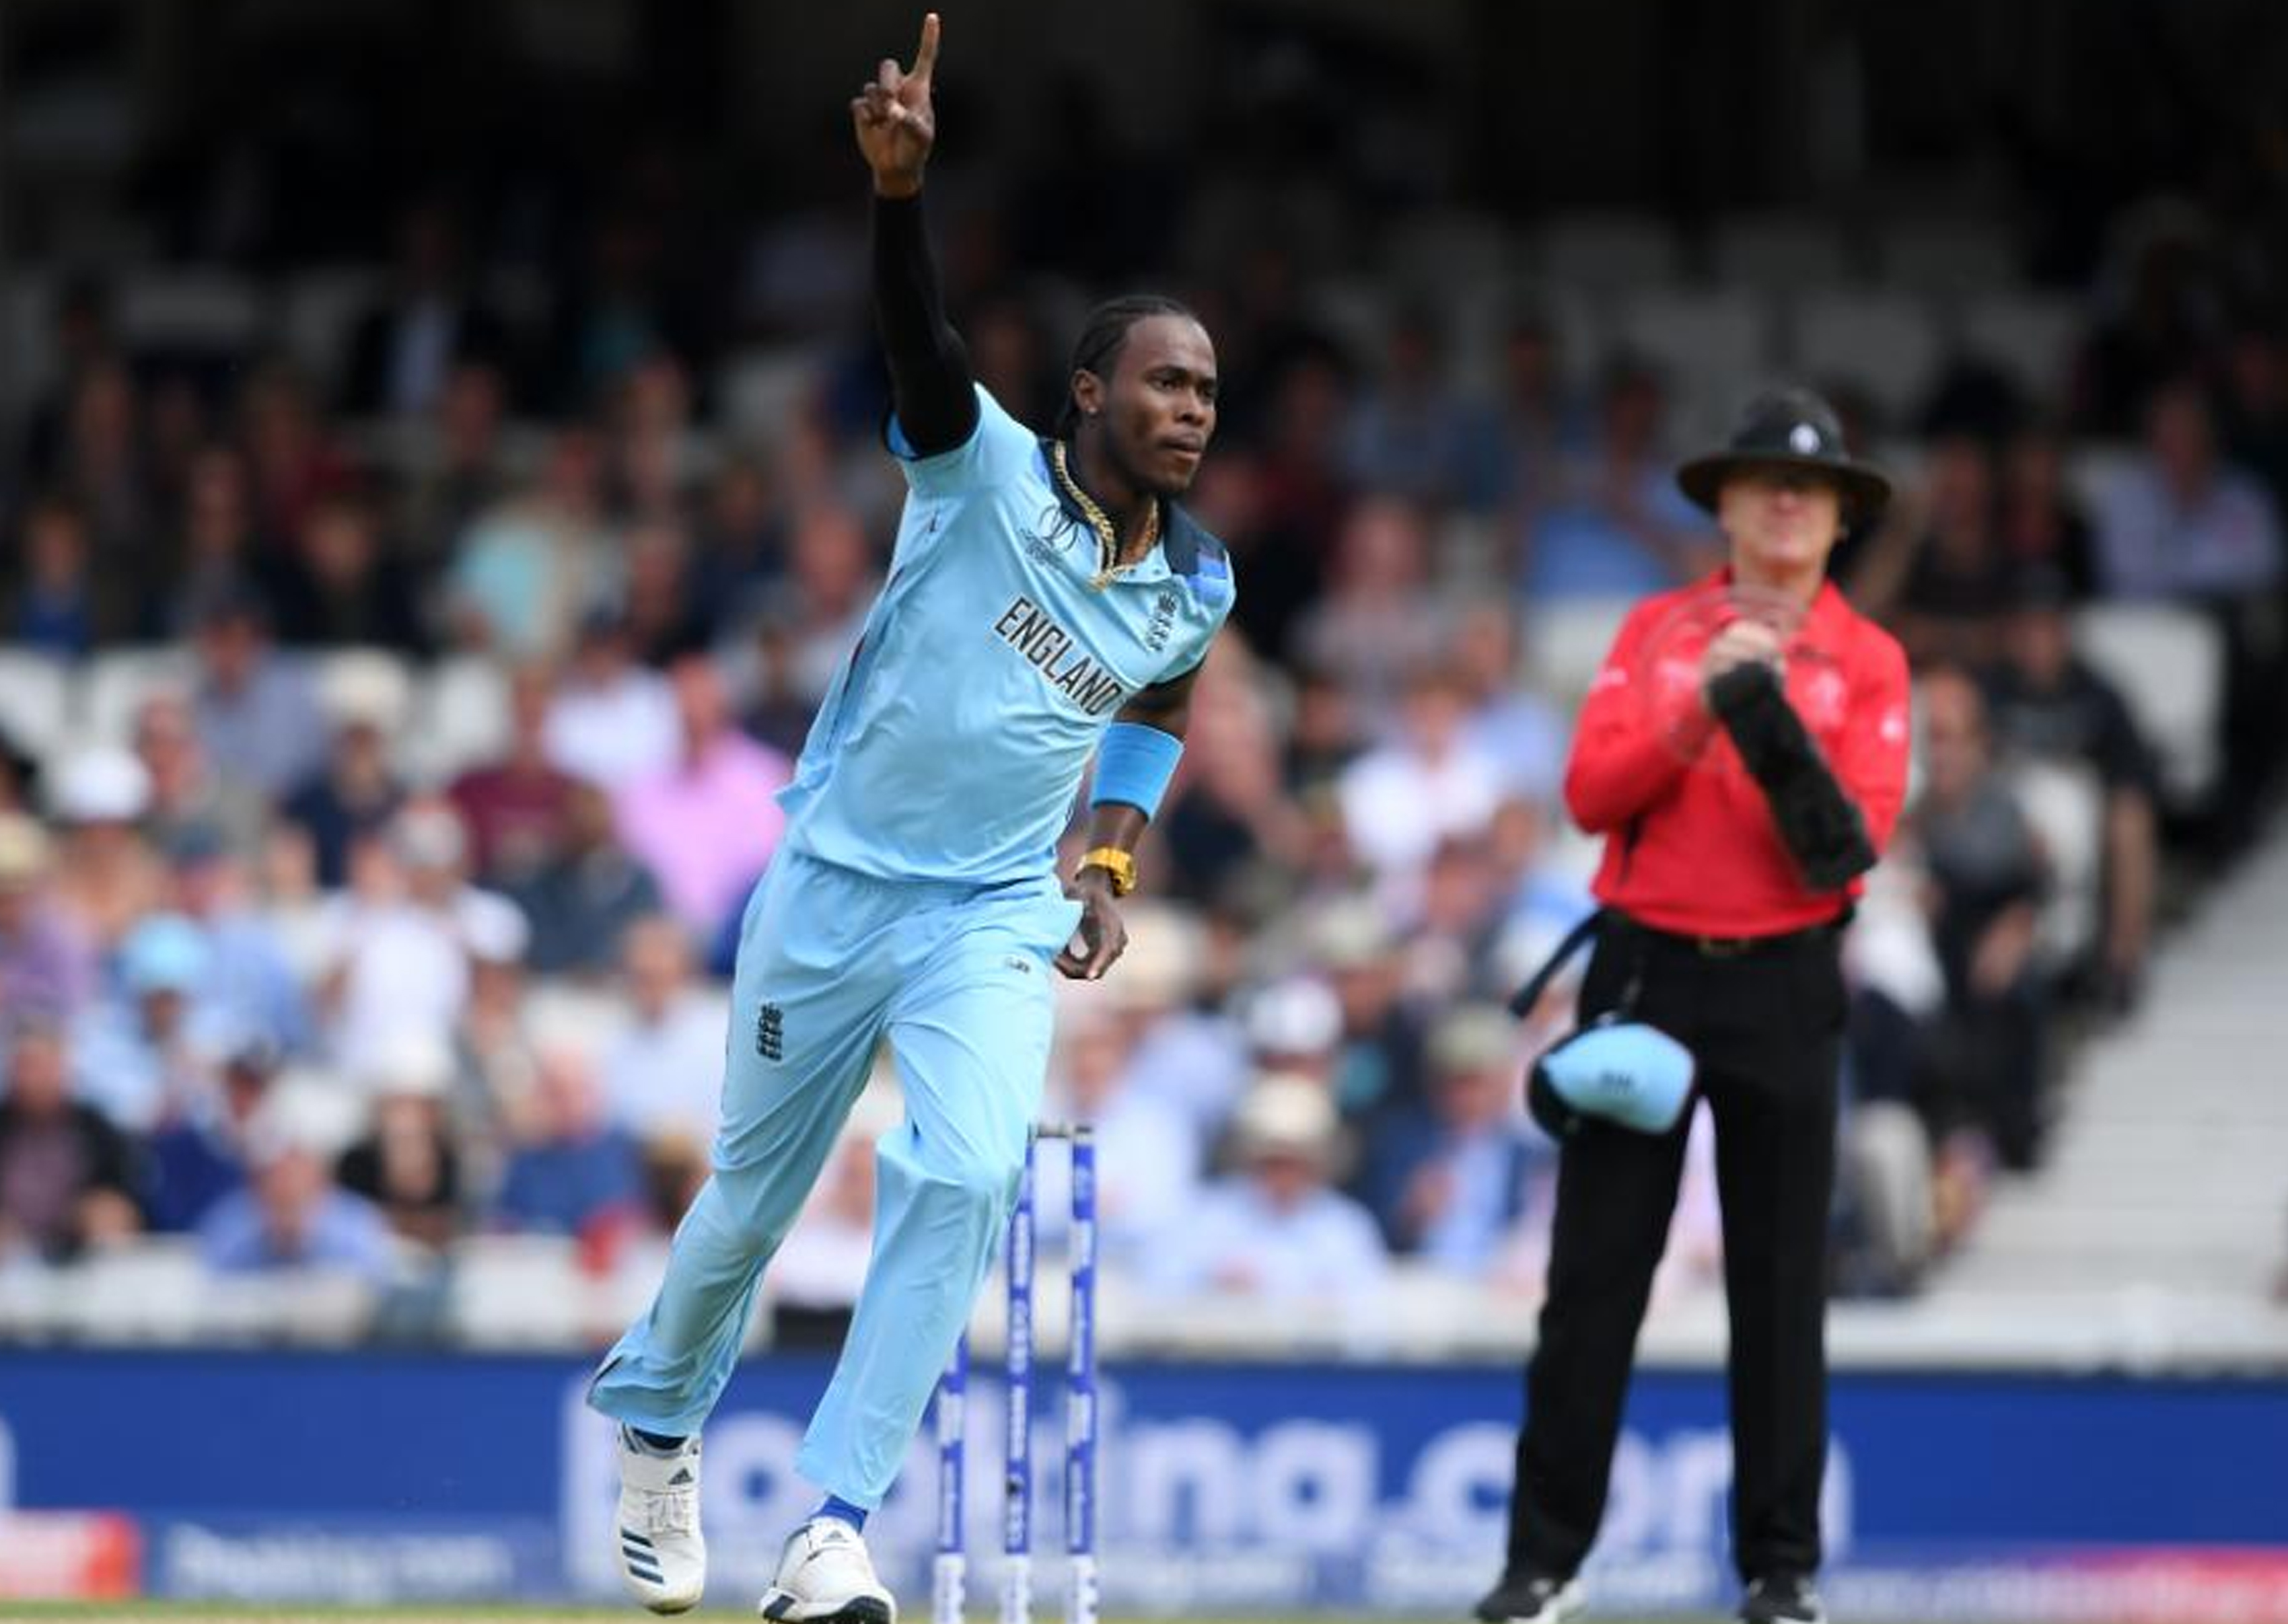 Cricket Pakistan | World Cup 2019: England vs South Africa3400 x 2414